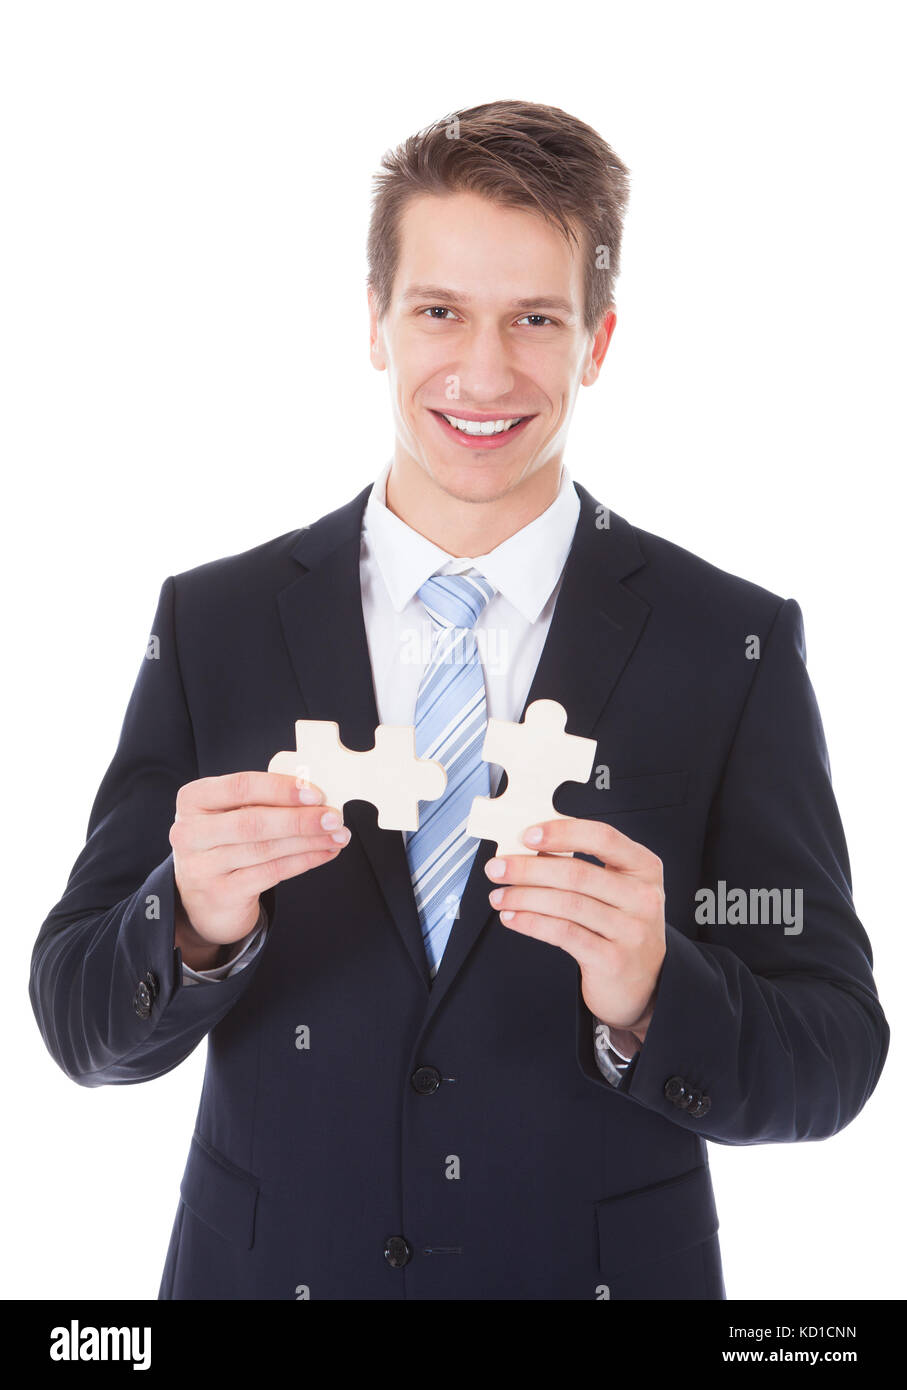 Young Businessman Holding Jigsaw Puzzle Over White Background Stock Photo